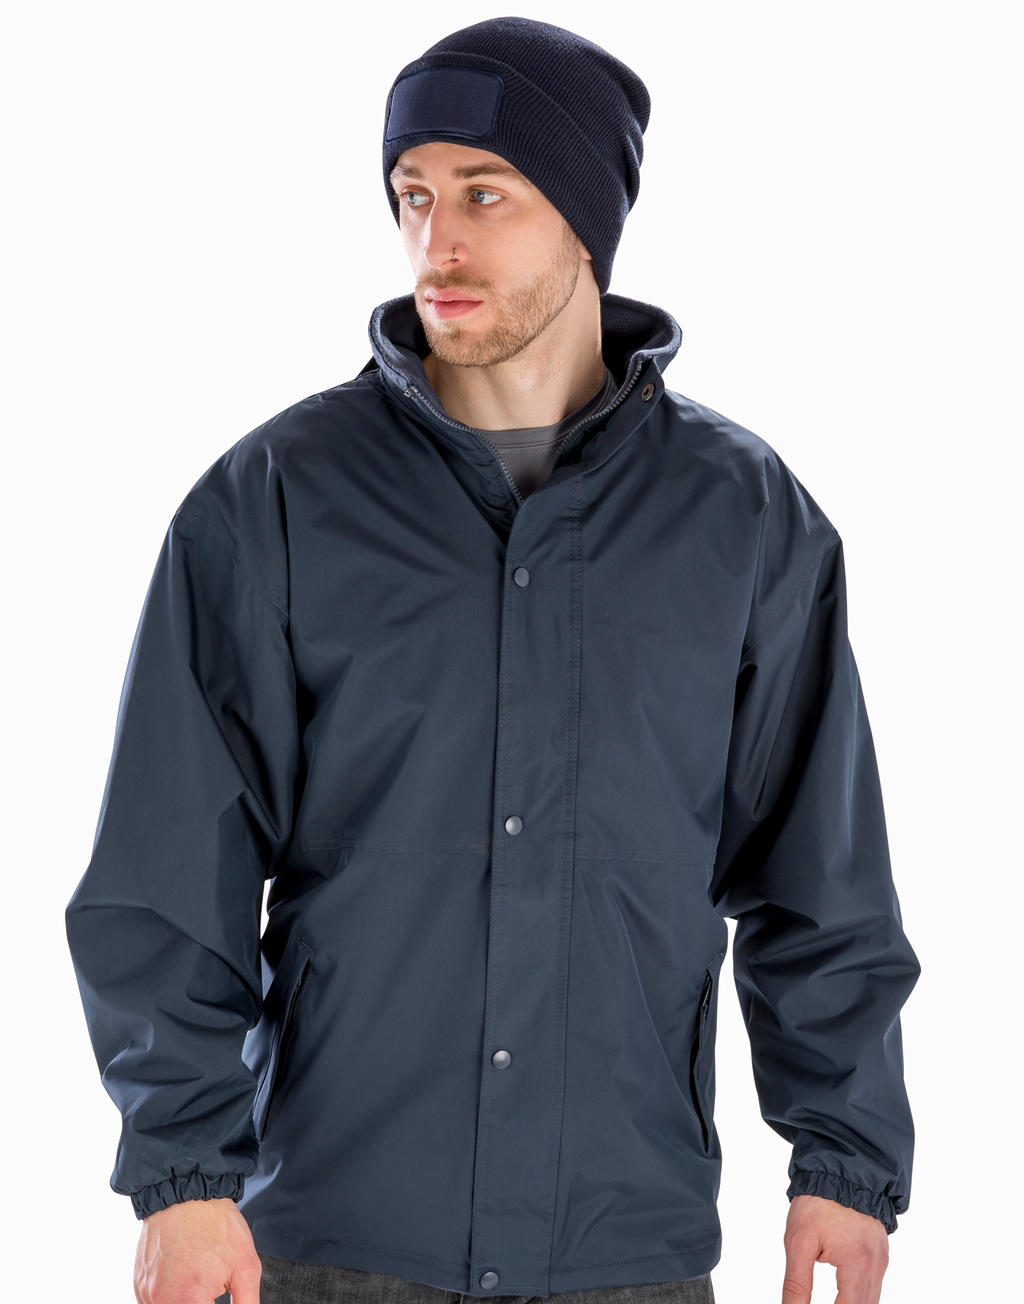  Outbound Reversible Jacket in Farbe Black/Grey